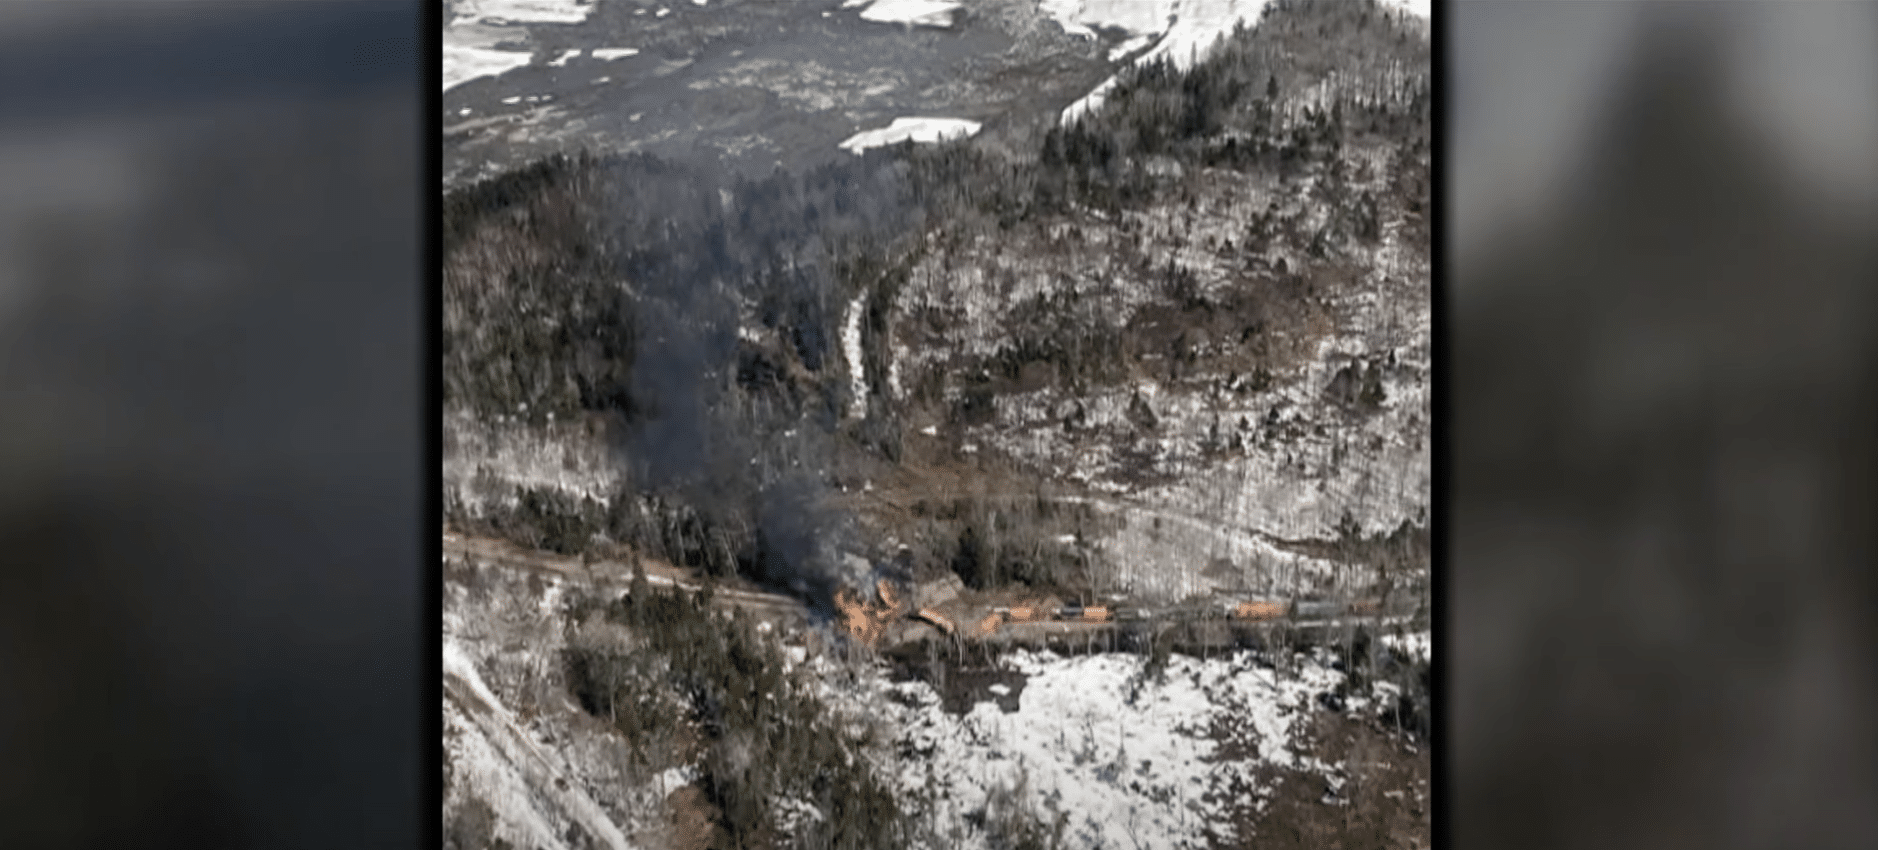 Train derails and causes forest fire in Rockwood, Maine